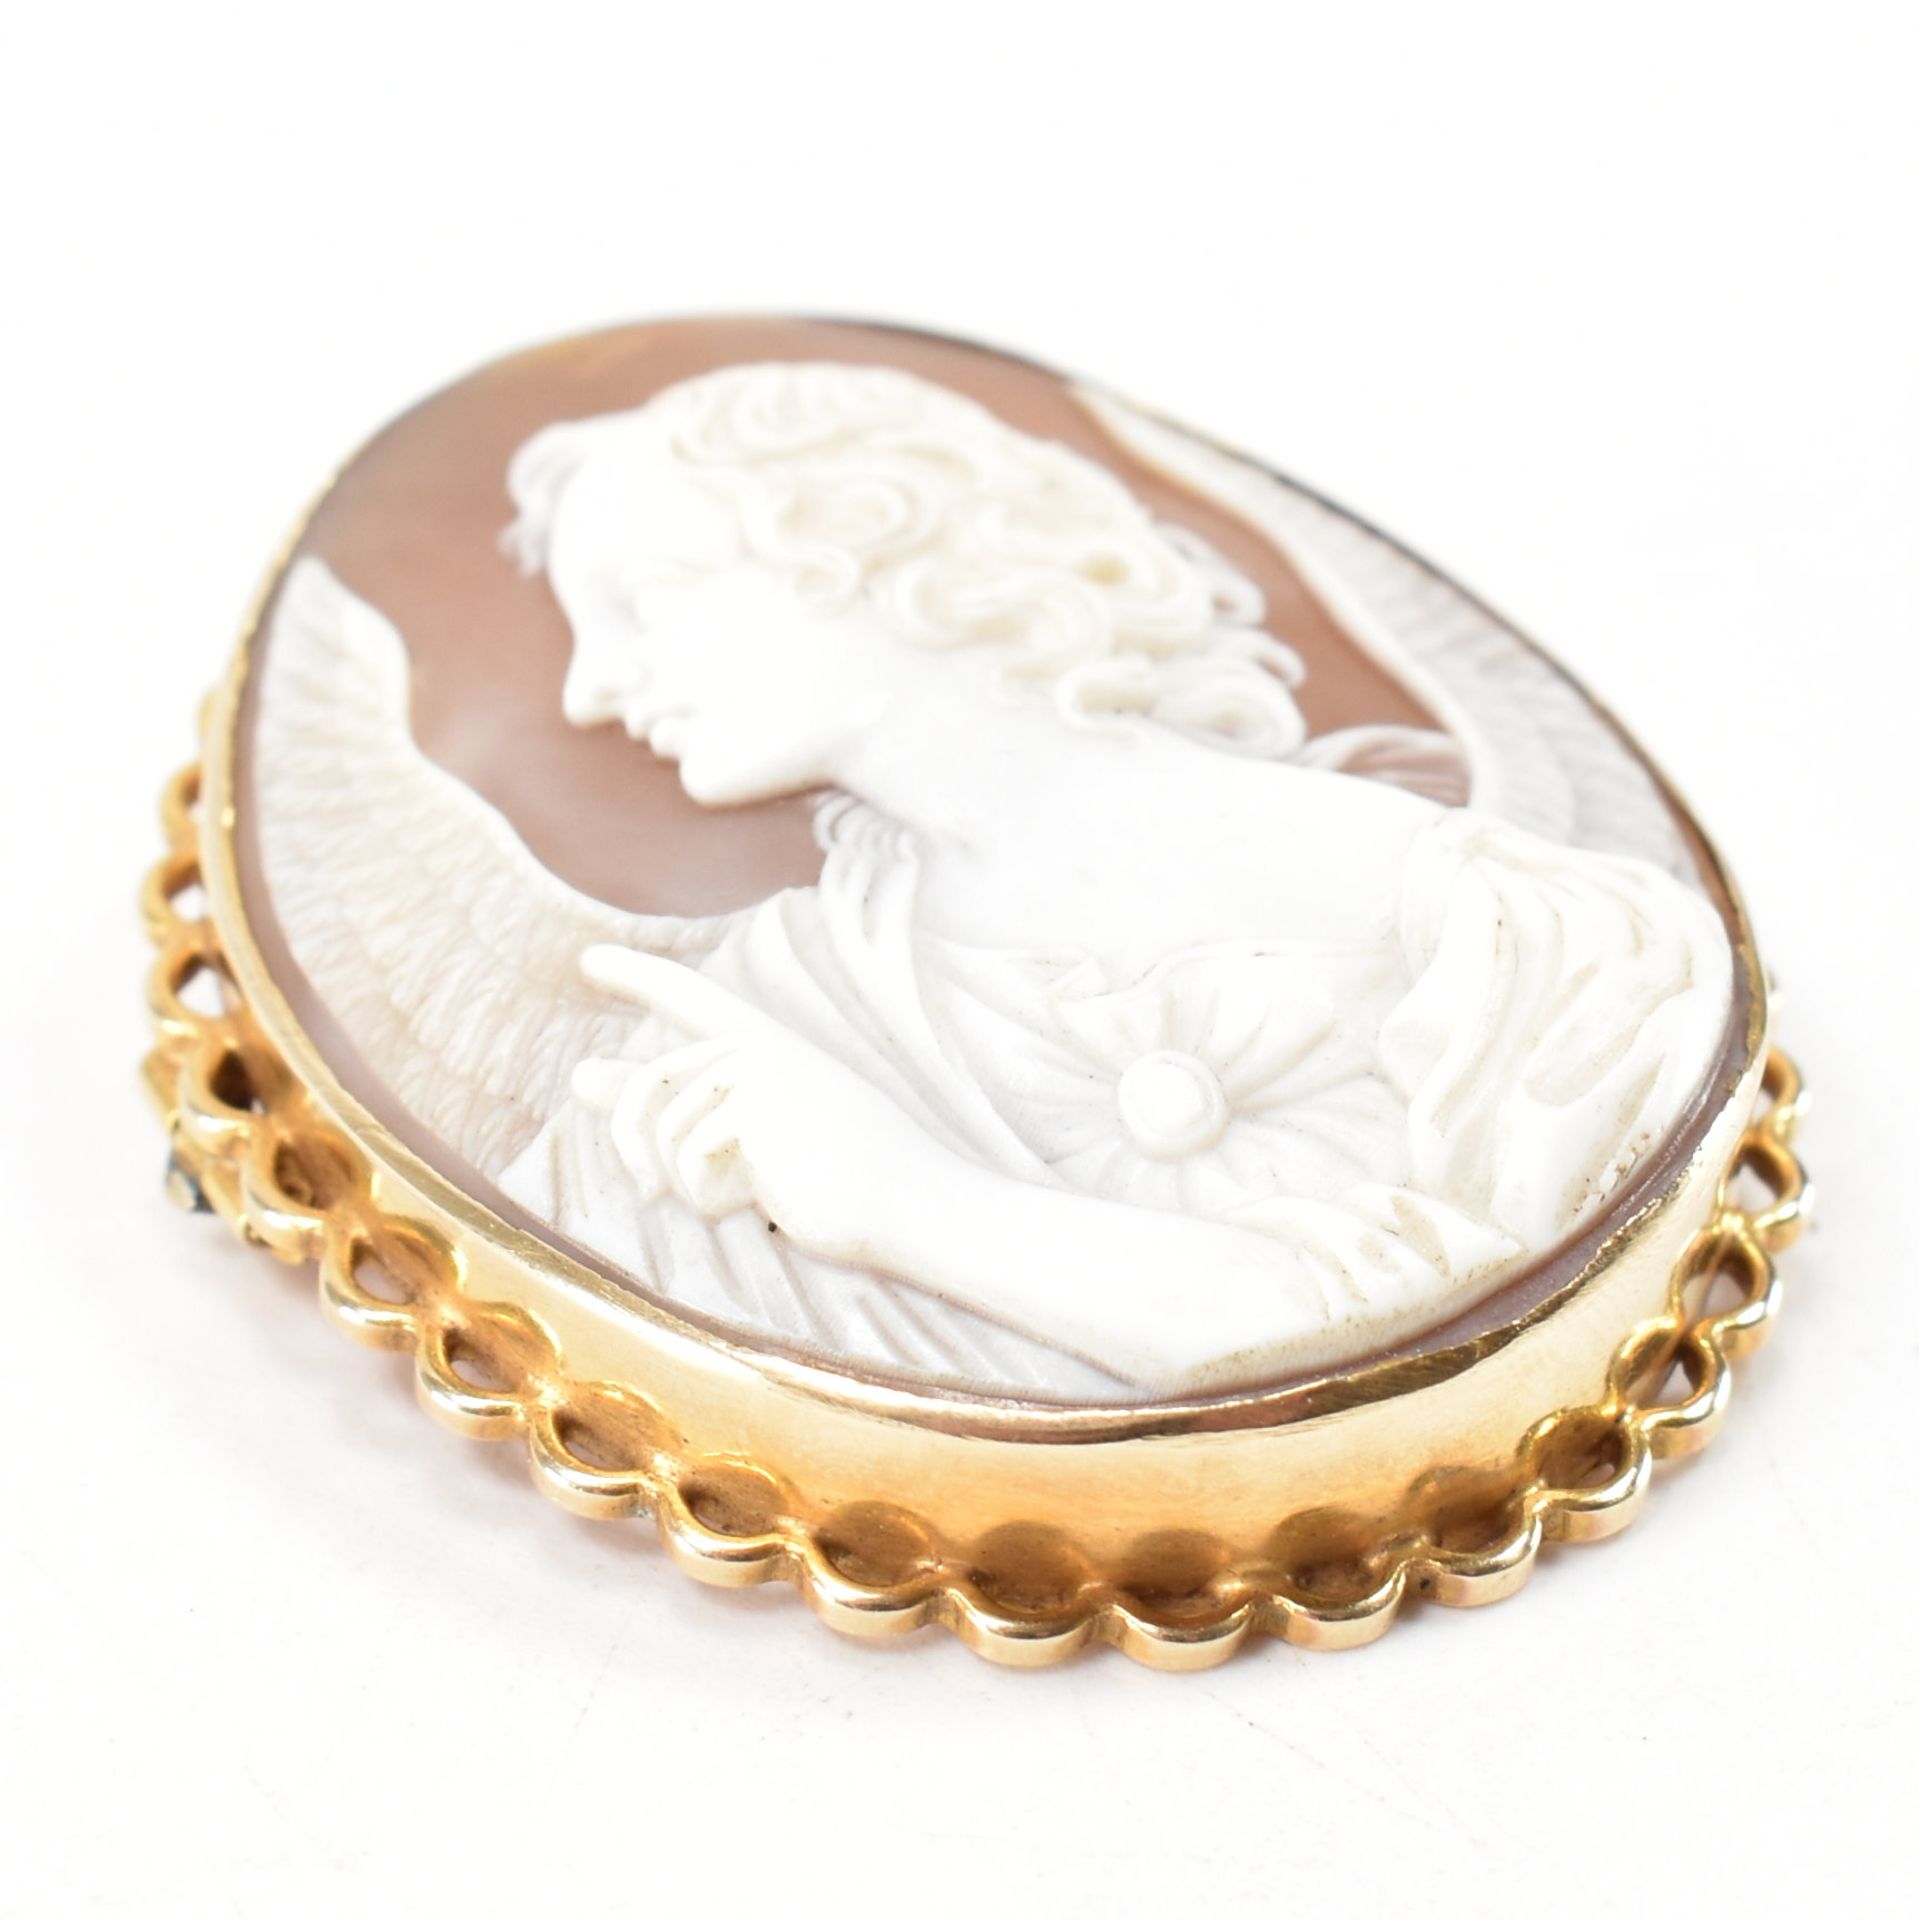 20TH CENTURY GOLD MOUNTED CARVED CAMEO BROOCH - Image 3 of 7